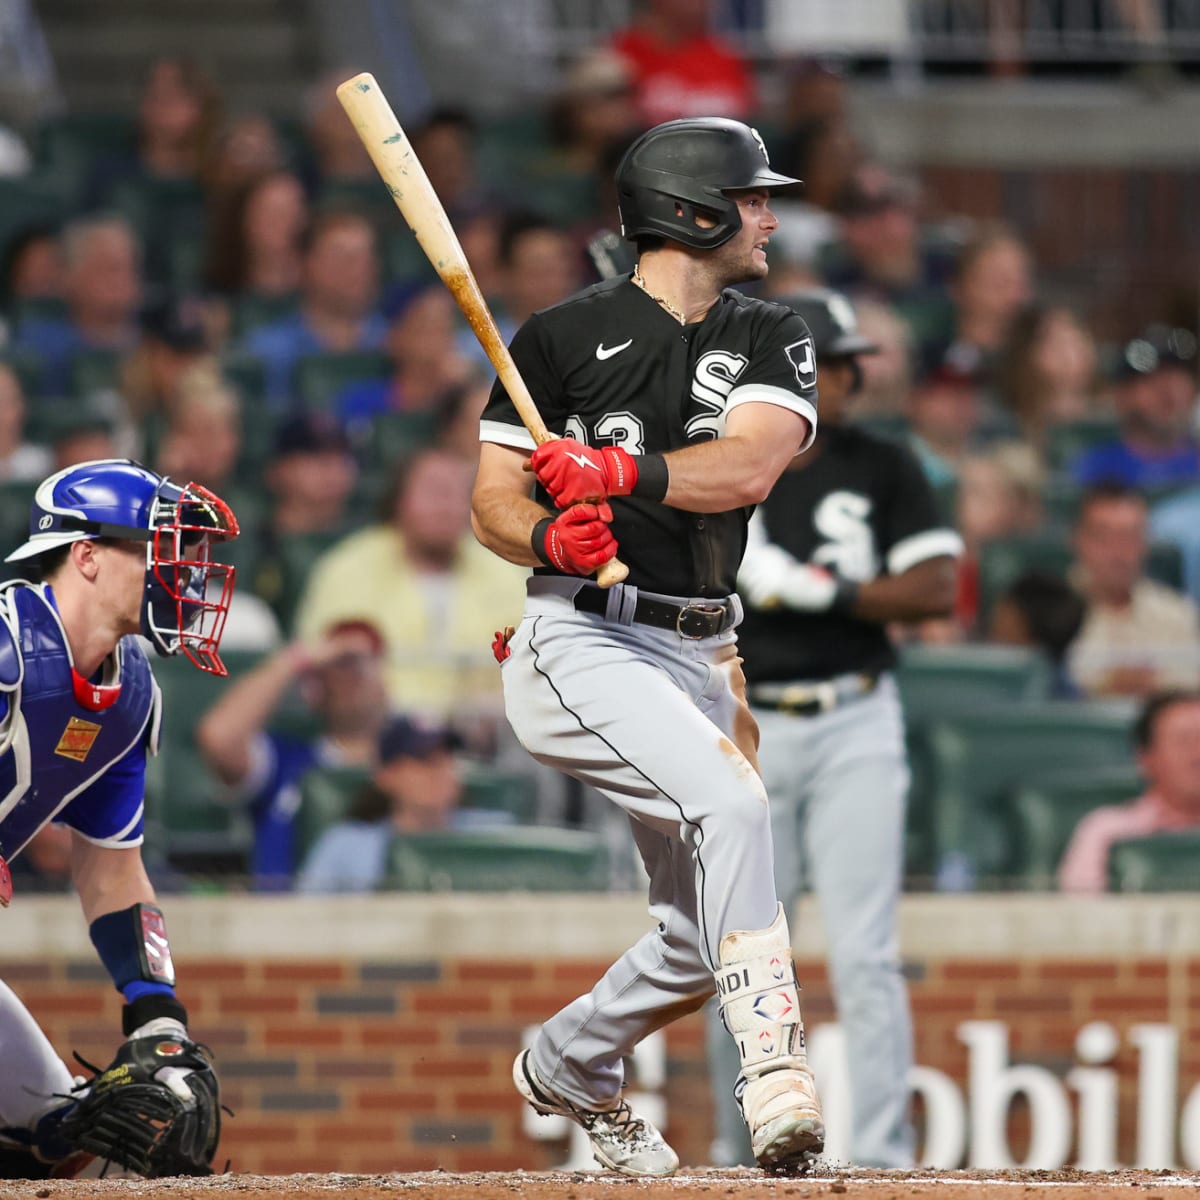 Burger hits go-ahead homer as White Sox beat Braves 6-5 for first